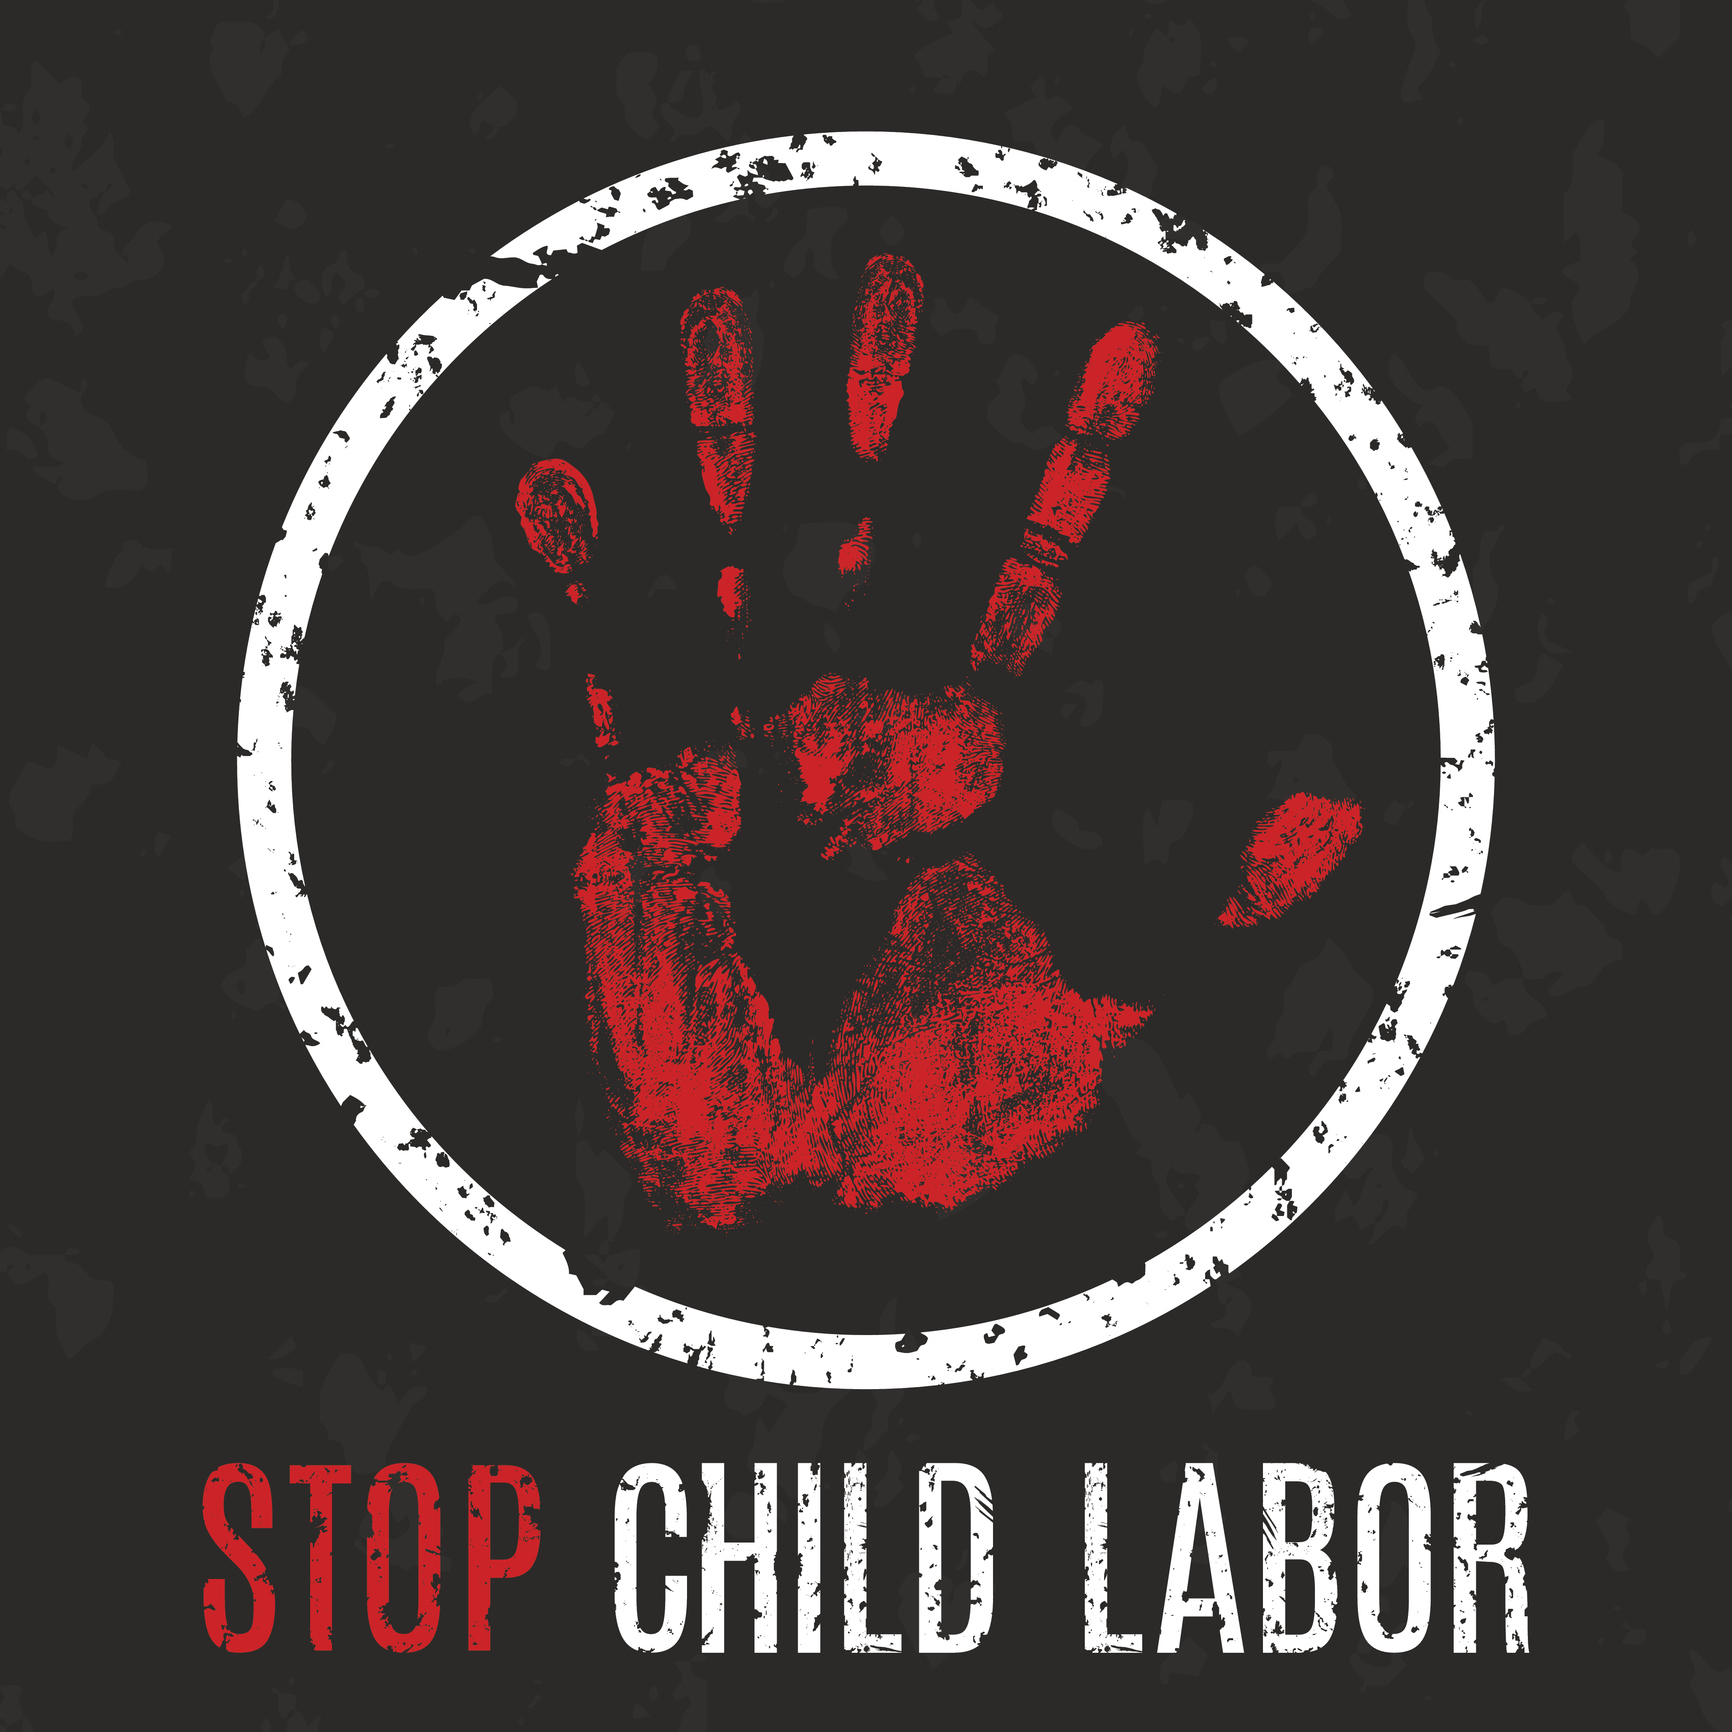 Download Child labour posters 